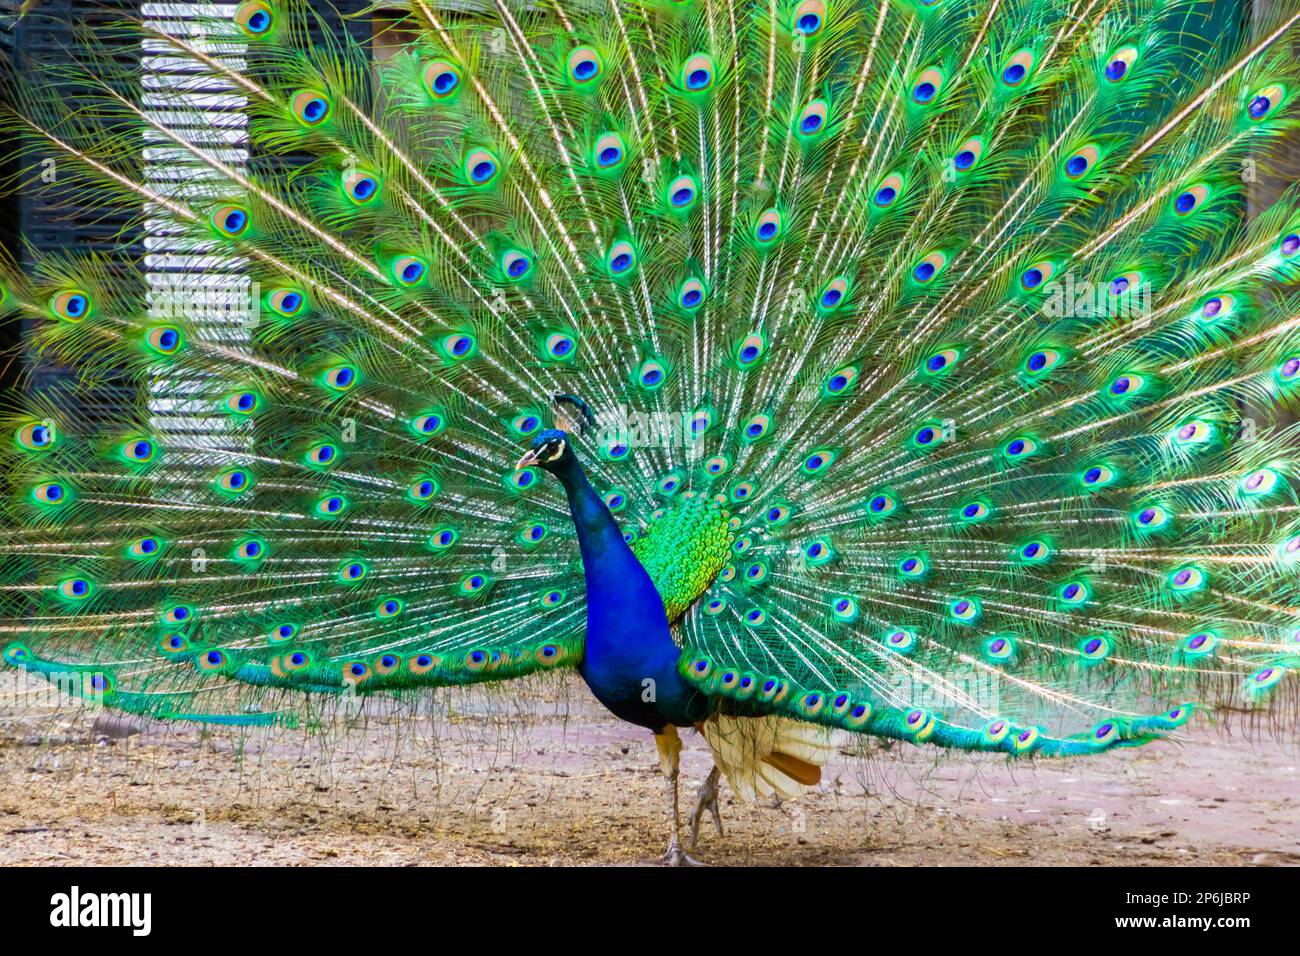 blue peacock showing off its beautiful feathers, tropical ornamental bird specie from India Stock Photo